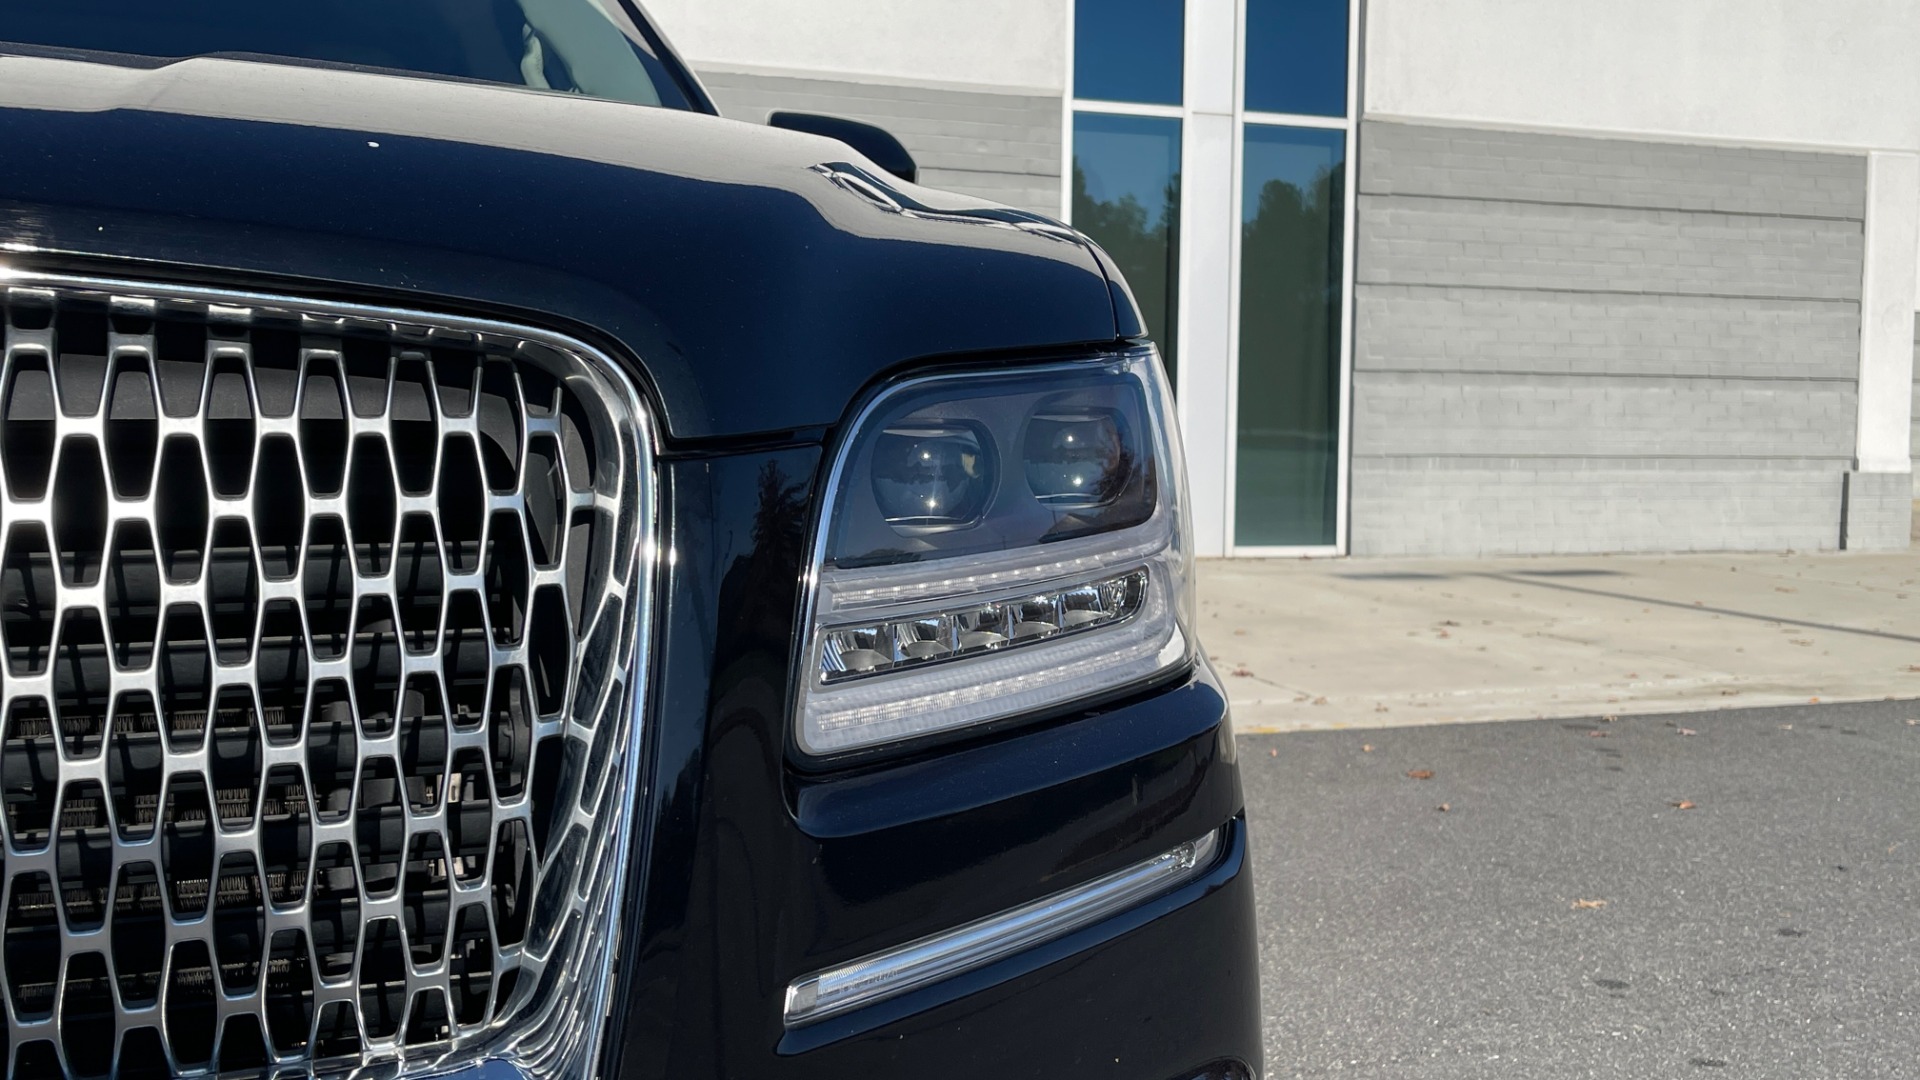 Used 2018 Lincoln NAVIGATOR L 4X4 SELECT / 3.5L V6 / 10-SPD AUTO / NAV / PANO-ROOF / 3-ROW / REARVIEW for sale Sold at Formula Imports in Charlotte NC 28227 12